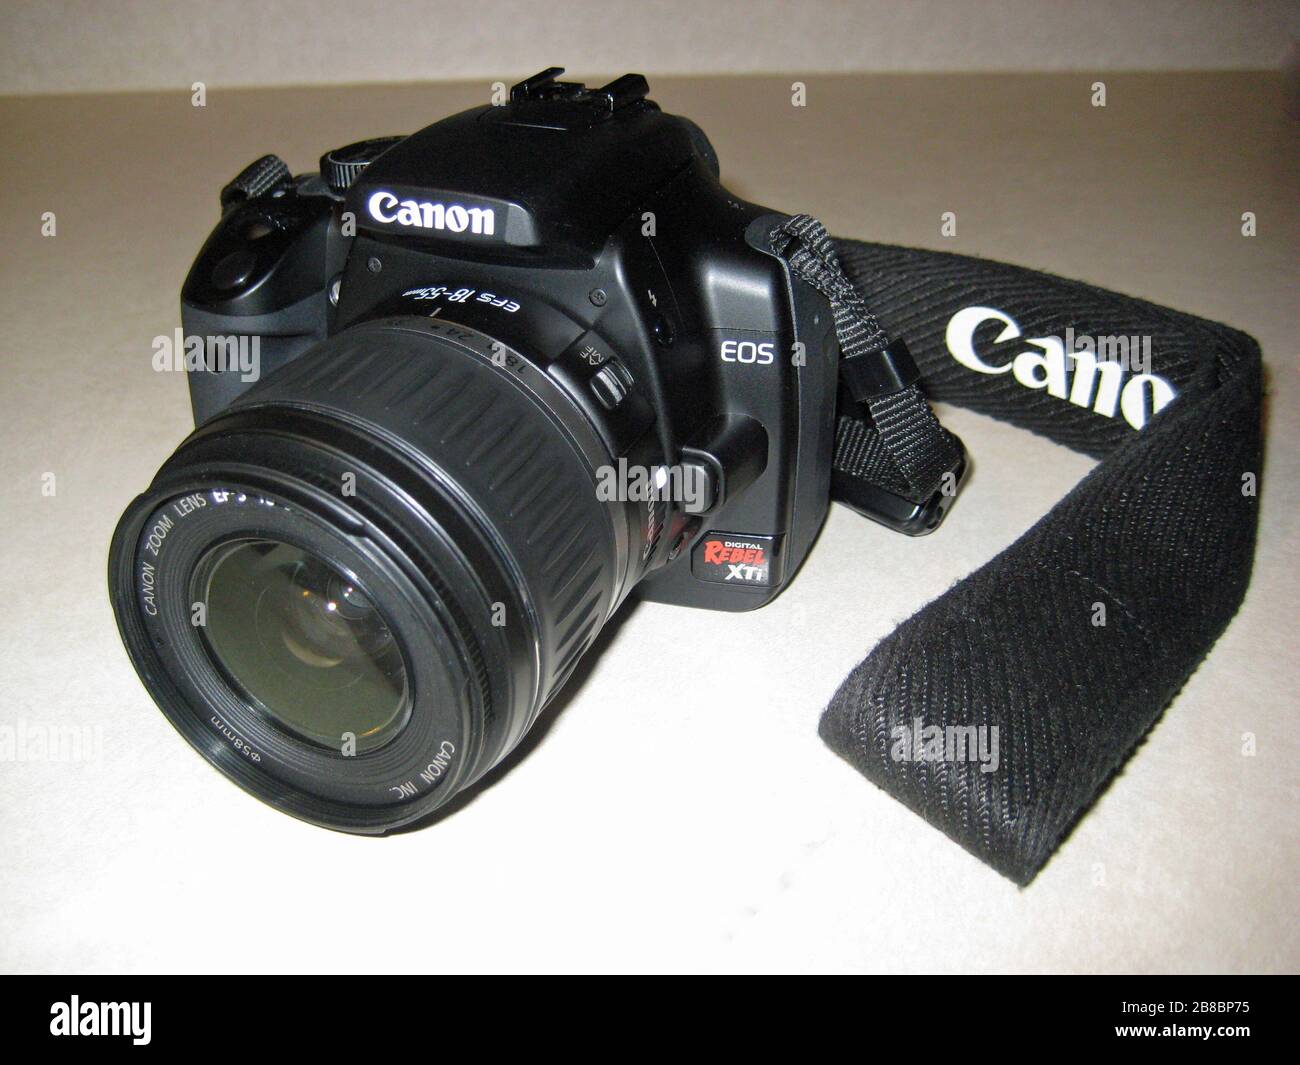 The Canon EOS Digital Rebel XTi with kit lens EF-S 18-55mm and neck strap.;  27 April 2007 (original upload date); Transferred from en.wikipedia to  Commons.; Bryanwake at English Wikipedia Stock Photo -